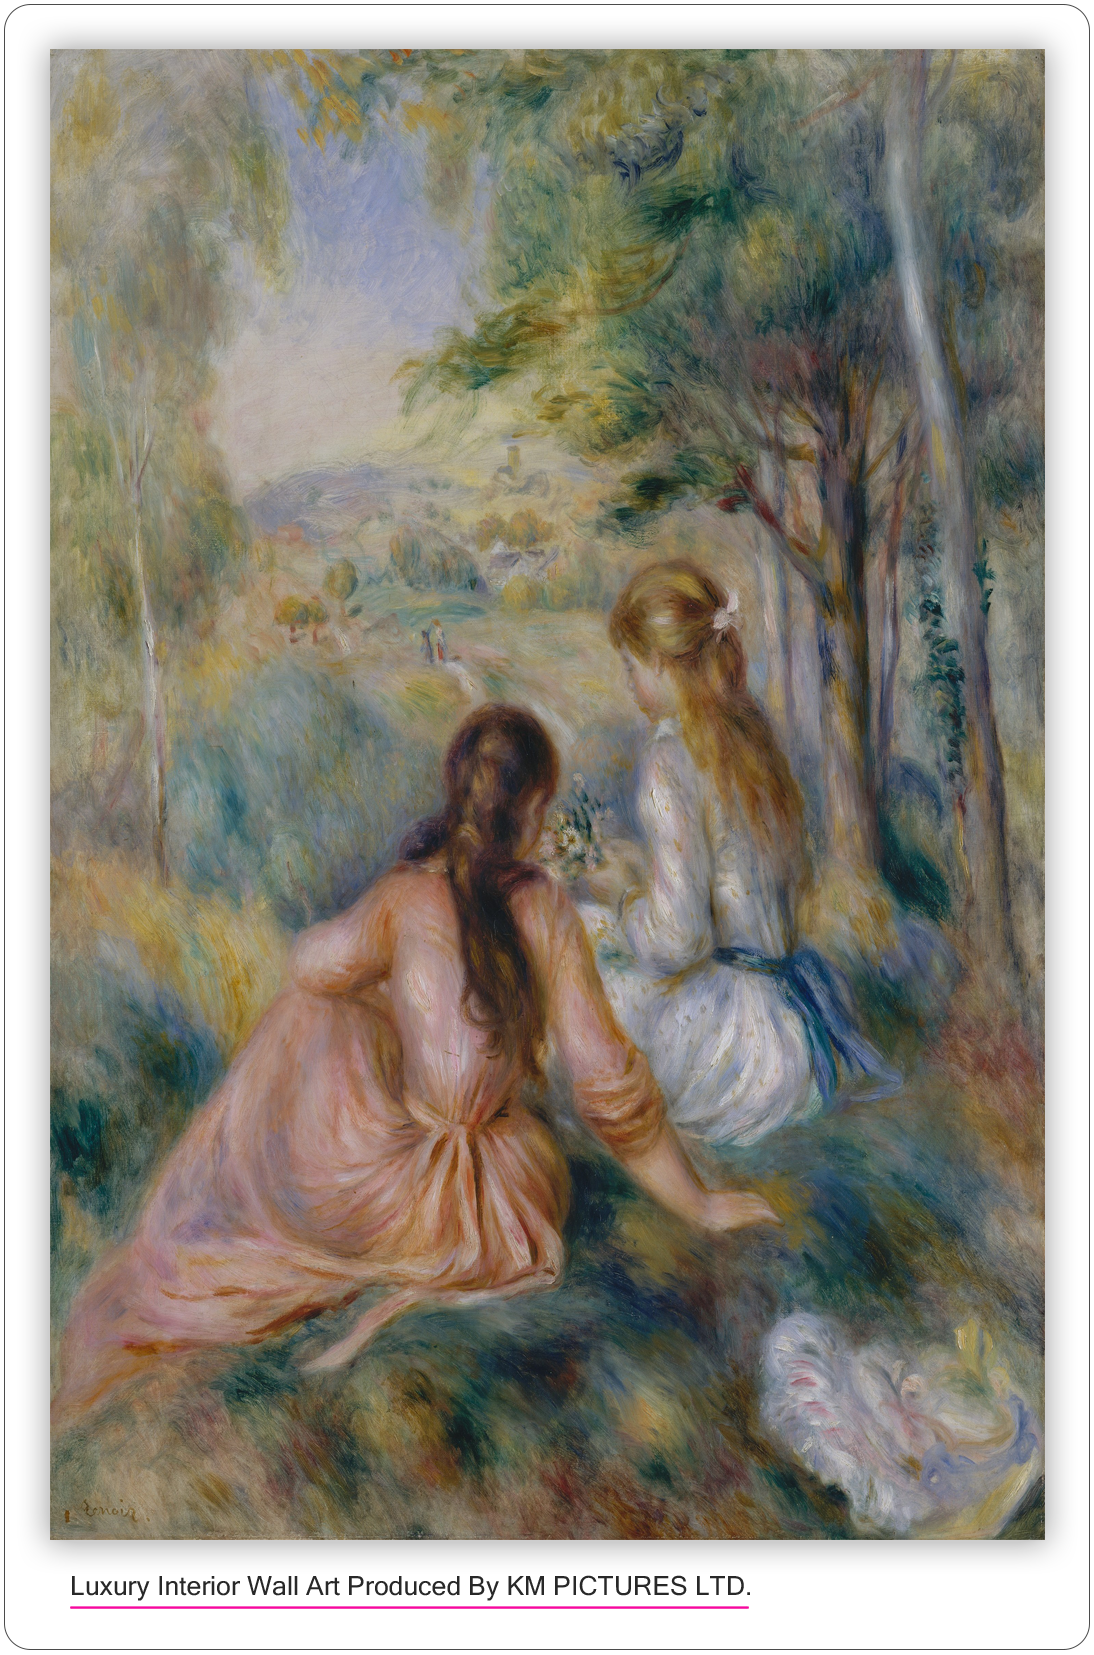 In the Meadow, 1888–92